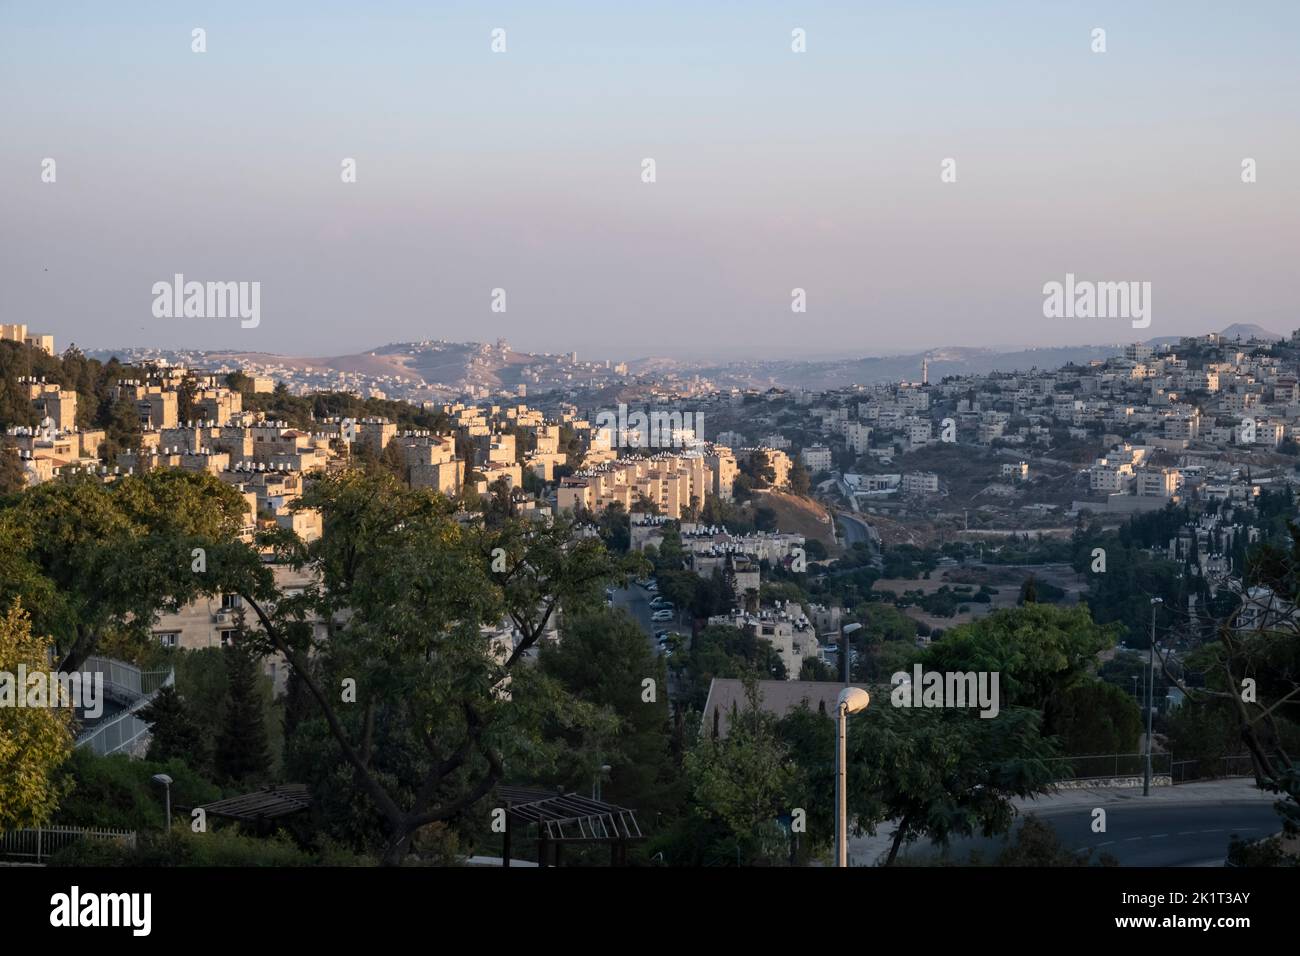 Partial view of Sur Baher also Tsur Baher, a Palestinian neighborhood and East Talpiot or Armon HaNatziv a Jewish neighborhood in southern East Jerusalem established by Israel in 1973 on land captured in the Six-Day War and occupied since. Israel Stock Photo